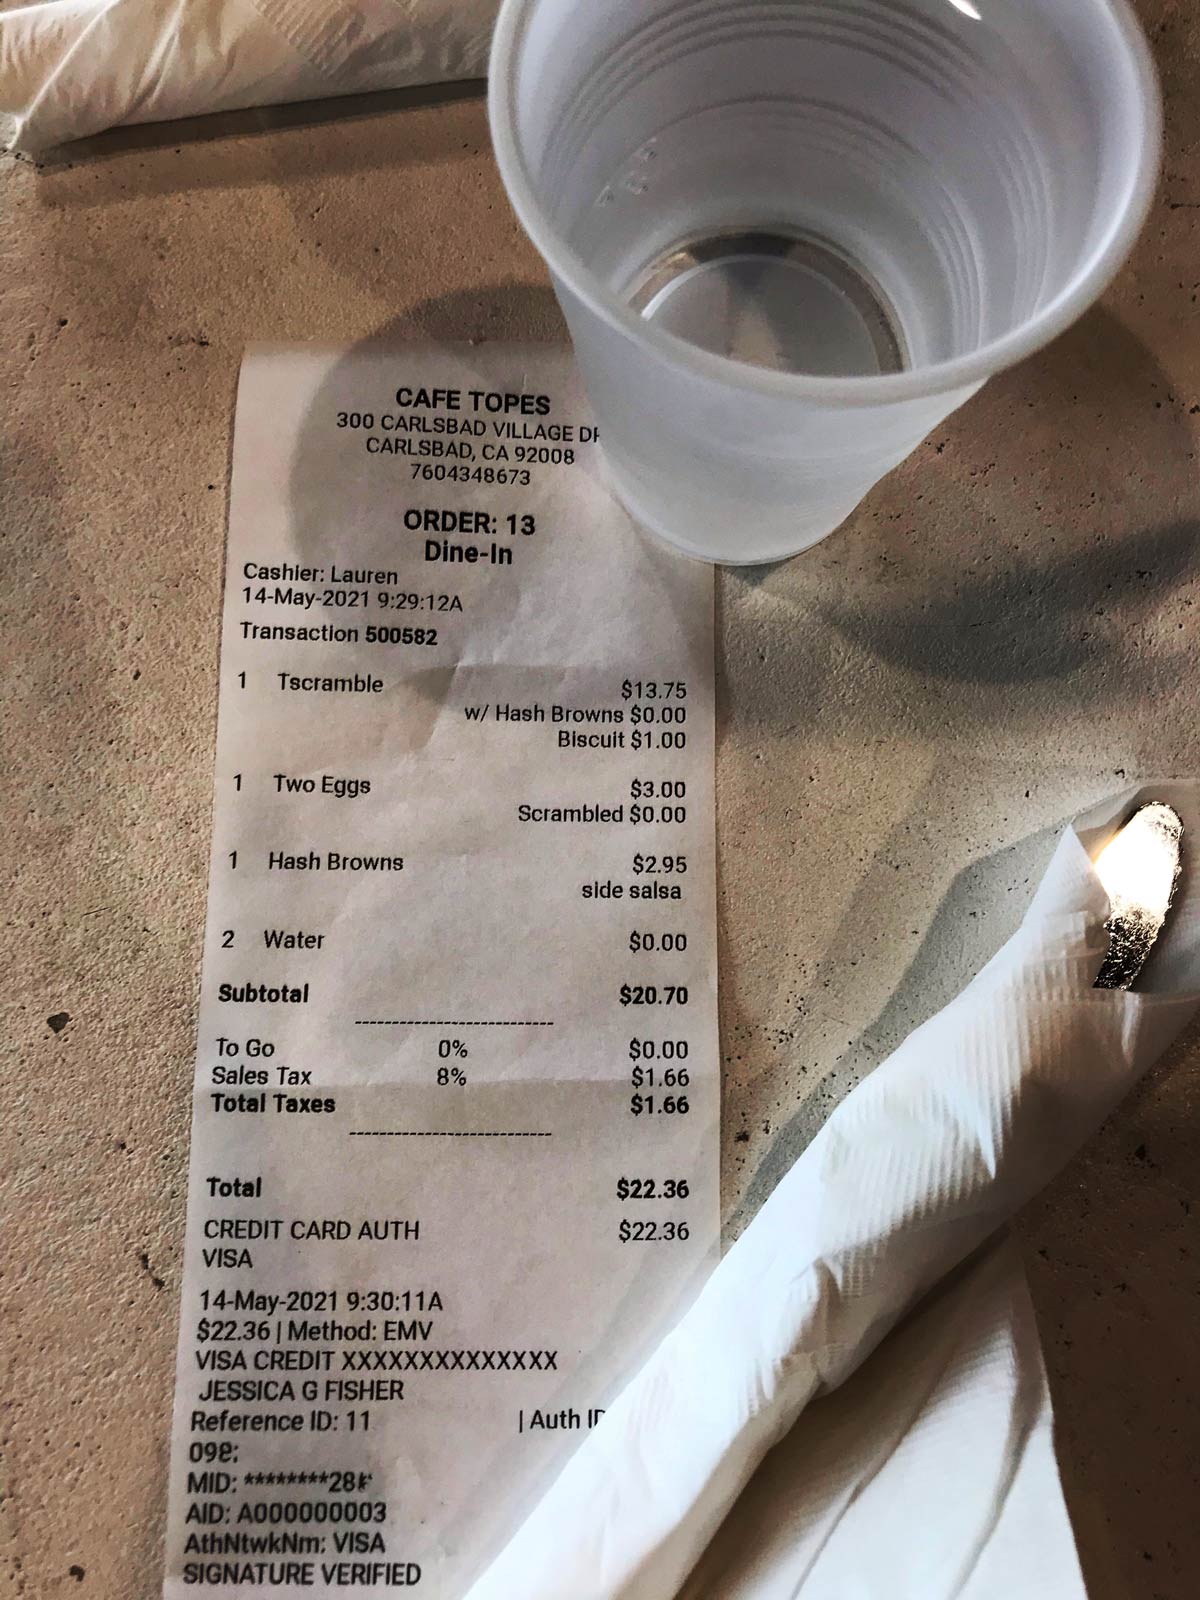 water cup next to receipt listing a la carte items.